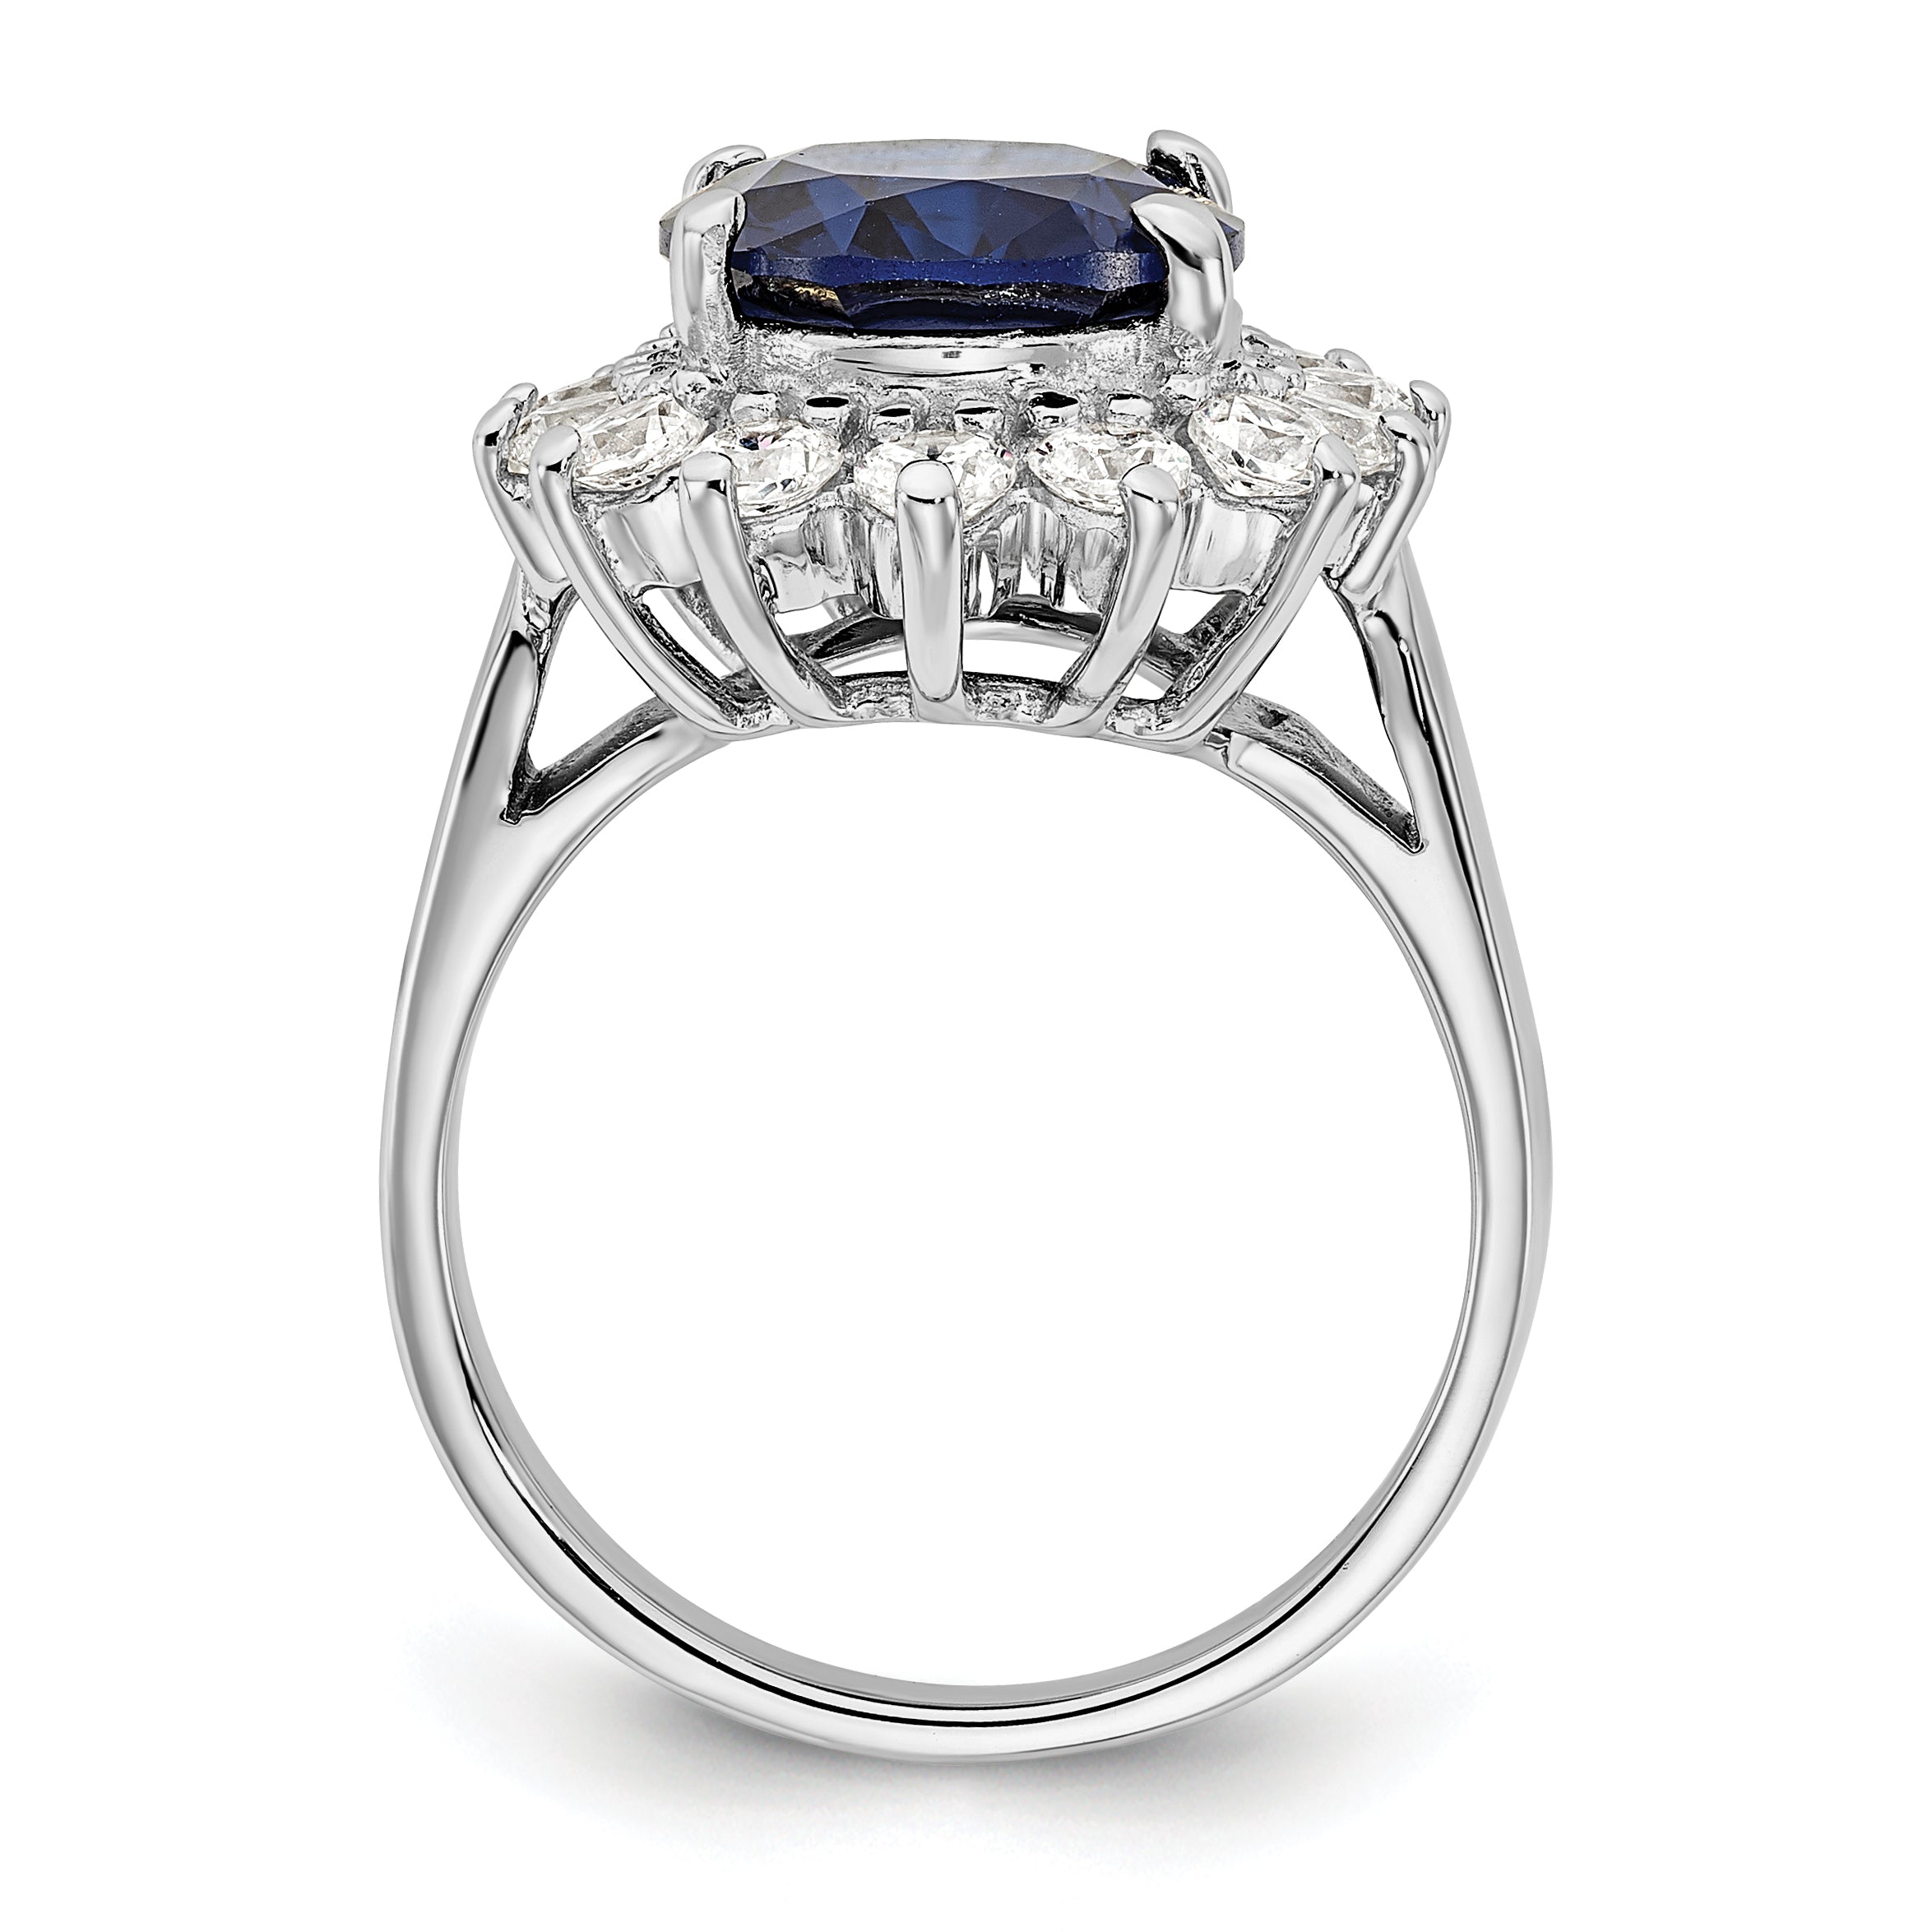 Cheryl M Sterling Silver Rhodium-plated Brilliant-cut Lab Created Dark Blue Spinel and Brilliant-cut White CZ Oval Halo Ring